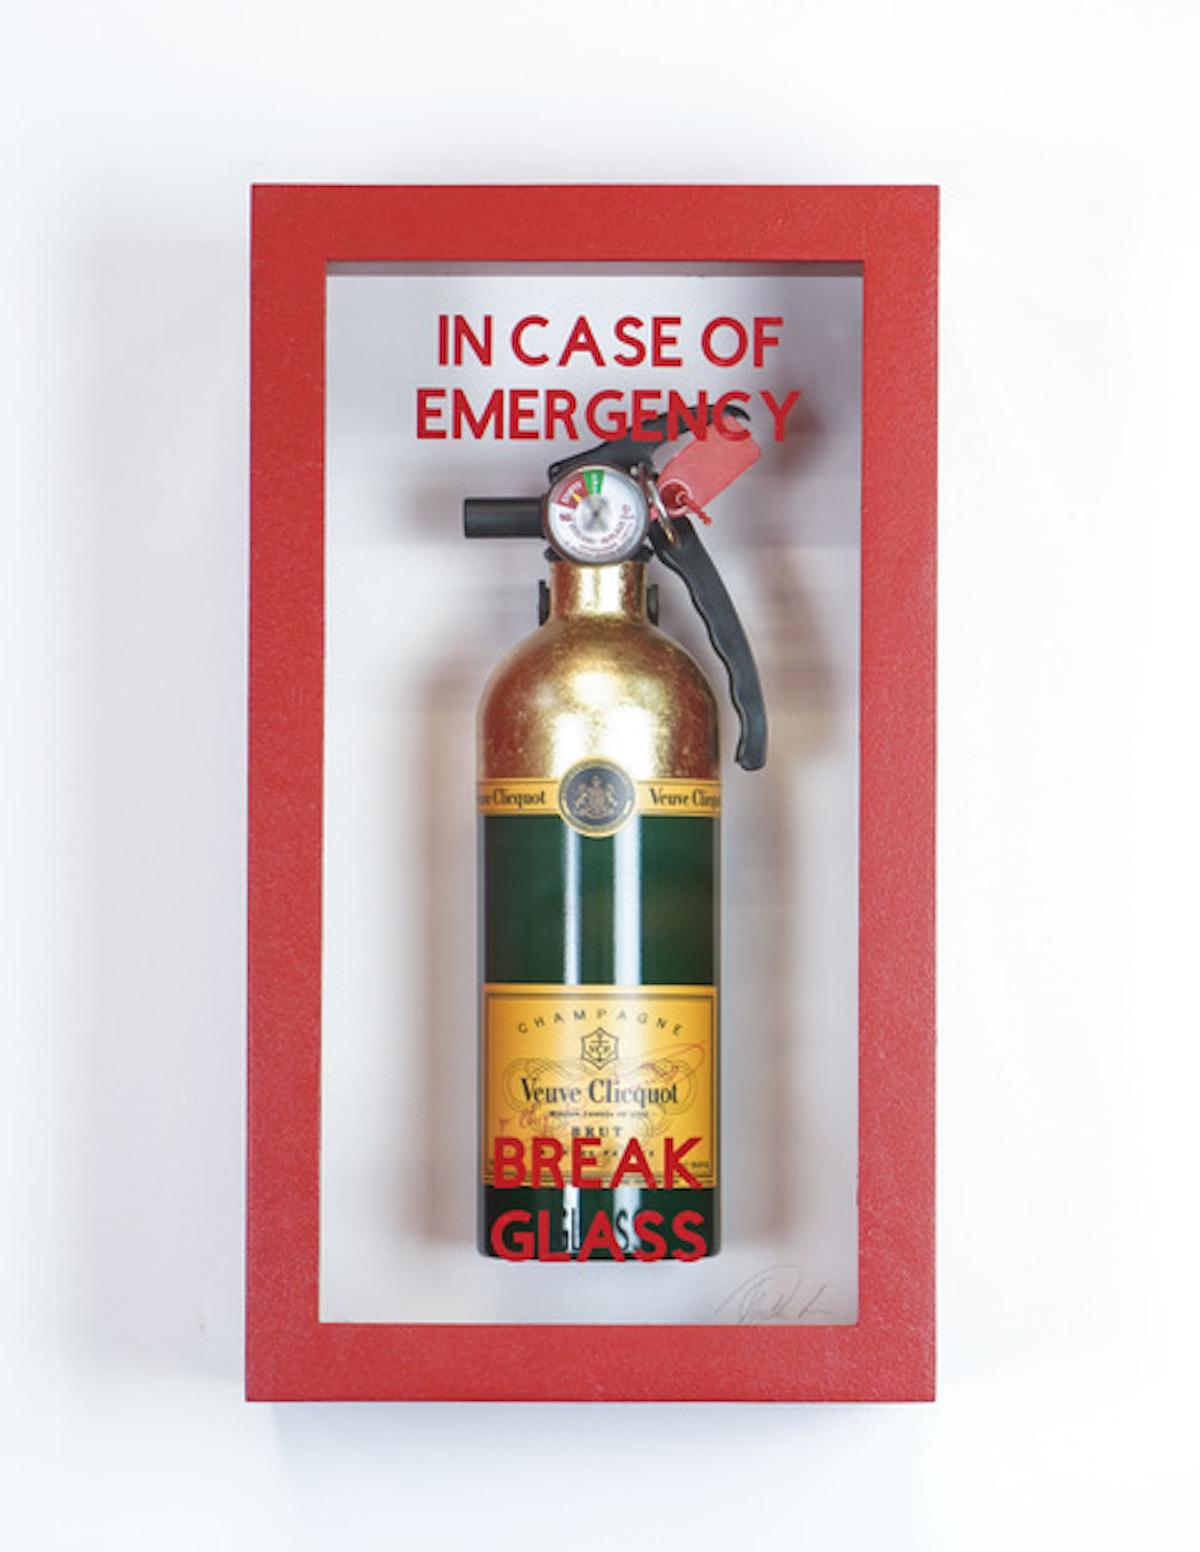 "In Case Of Emergency - Mini Vueve Fire Extinguisher" - Mixed Media Art by Plastic Jesus